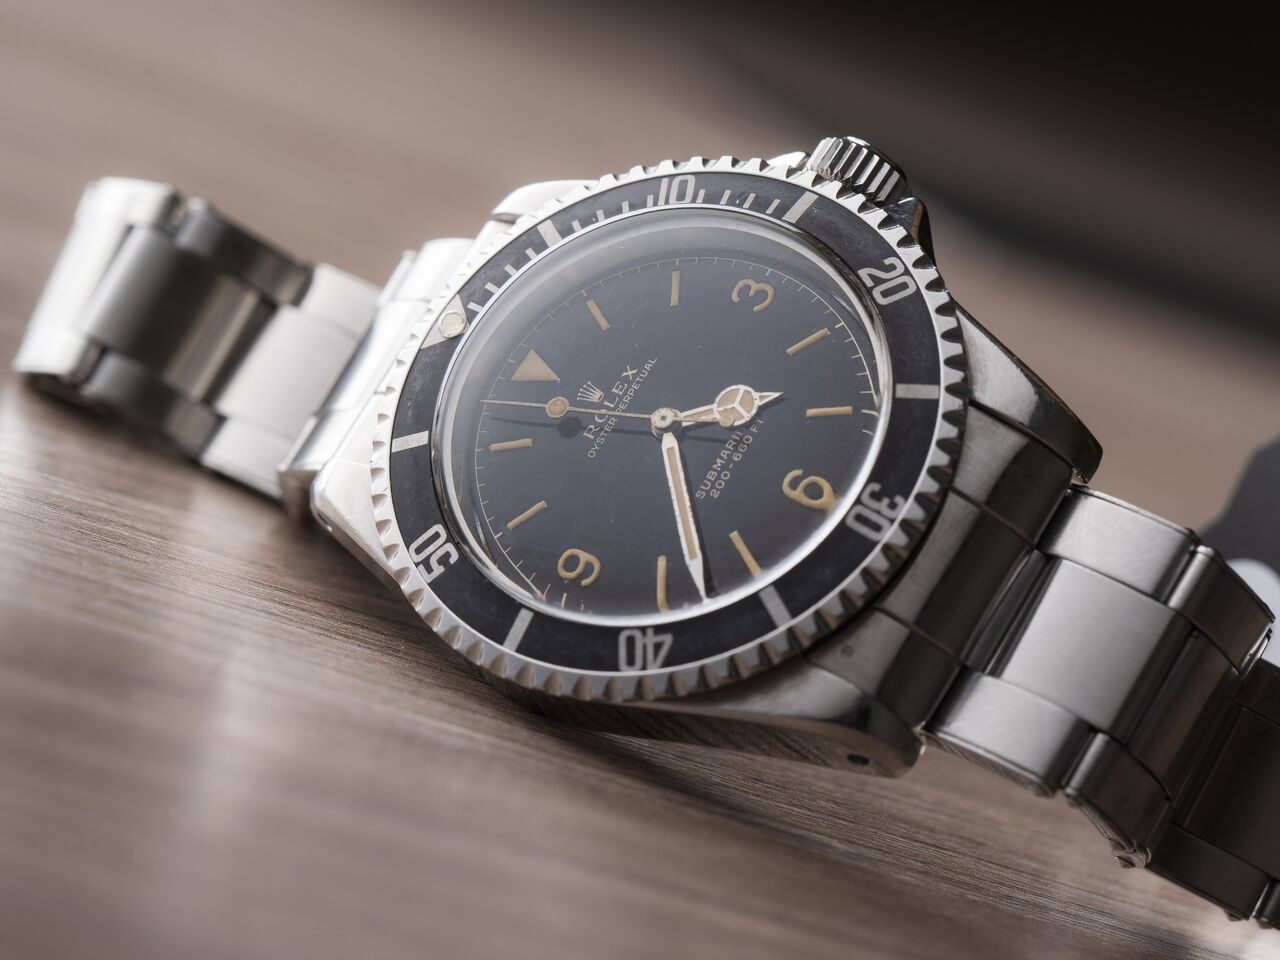 Throwback Thursday: Rolex Submariner “Meters first”